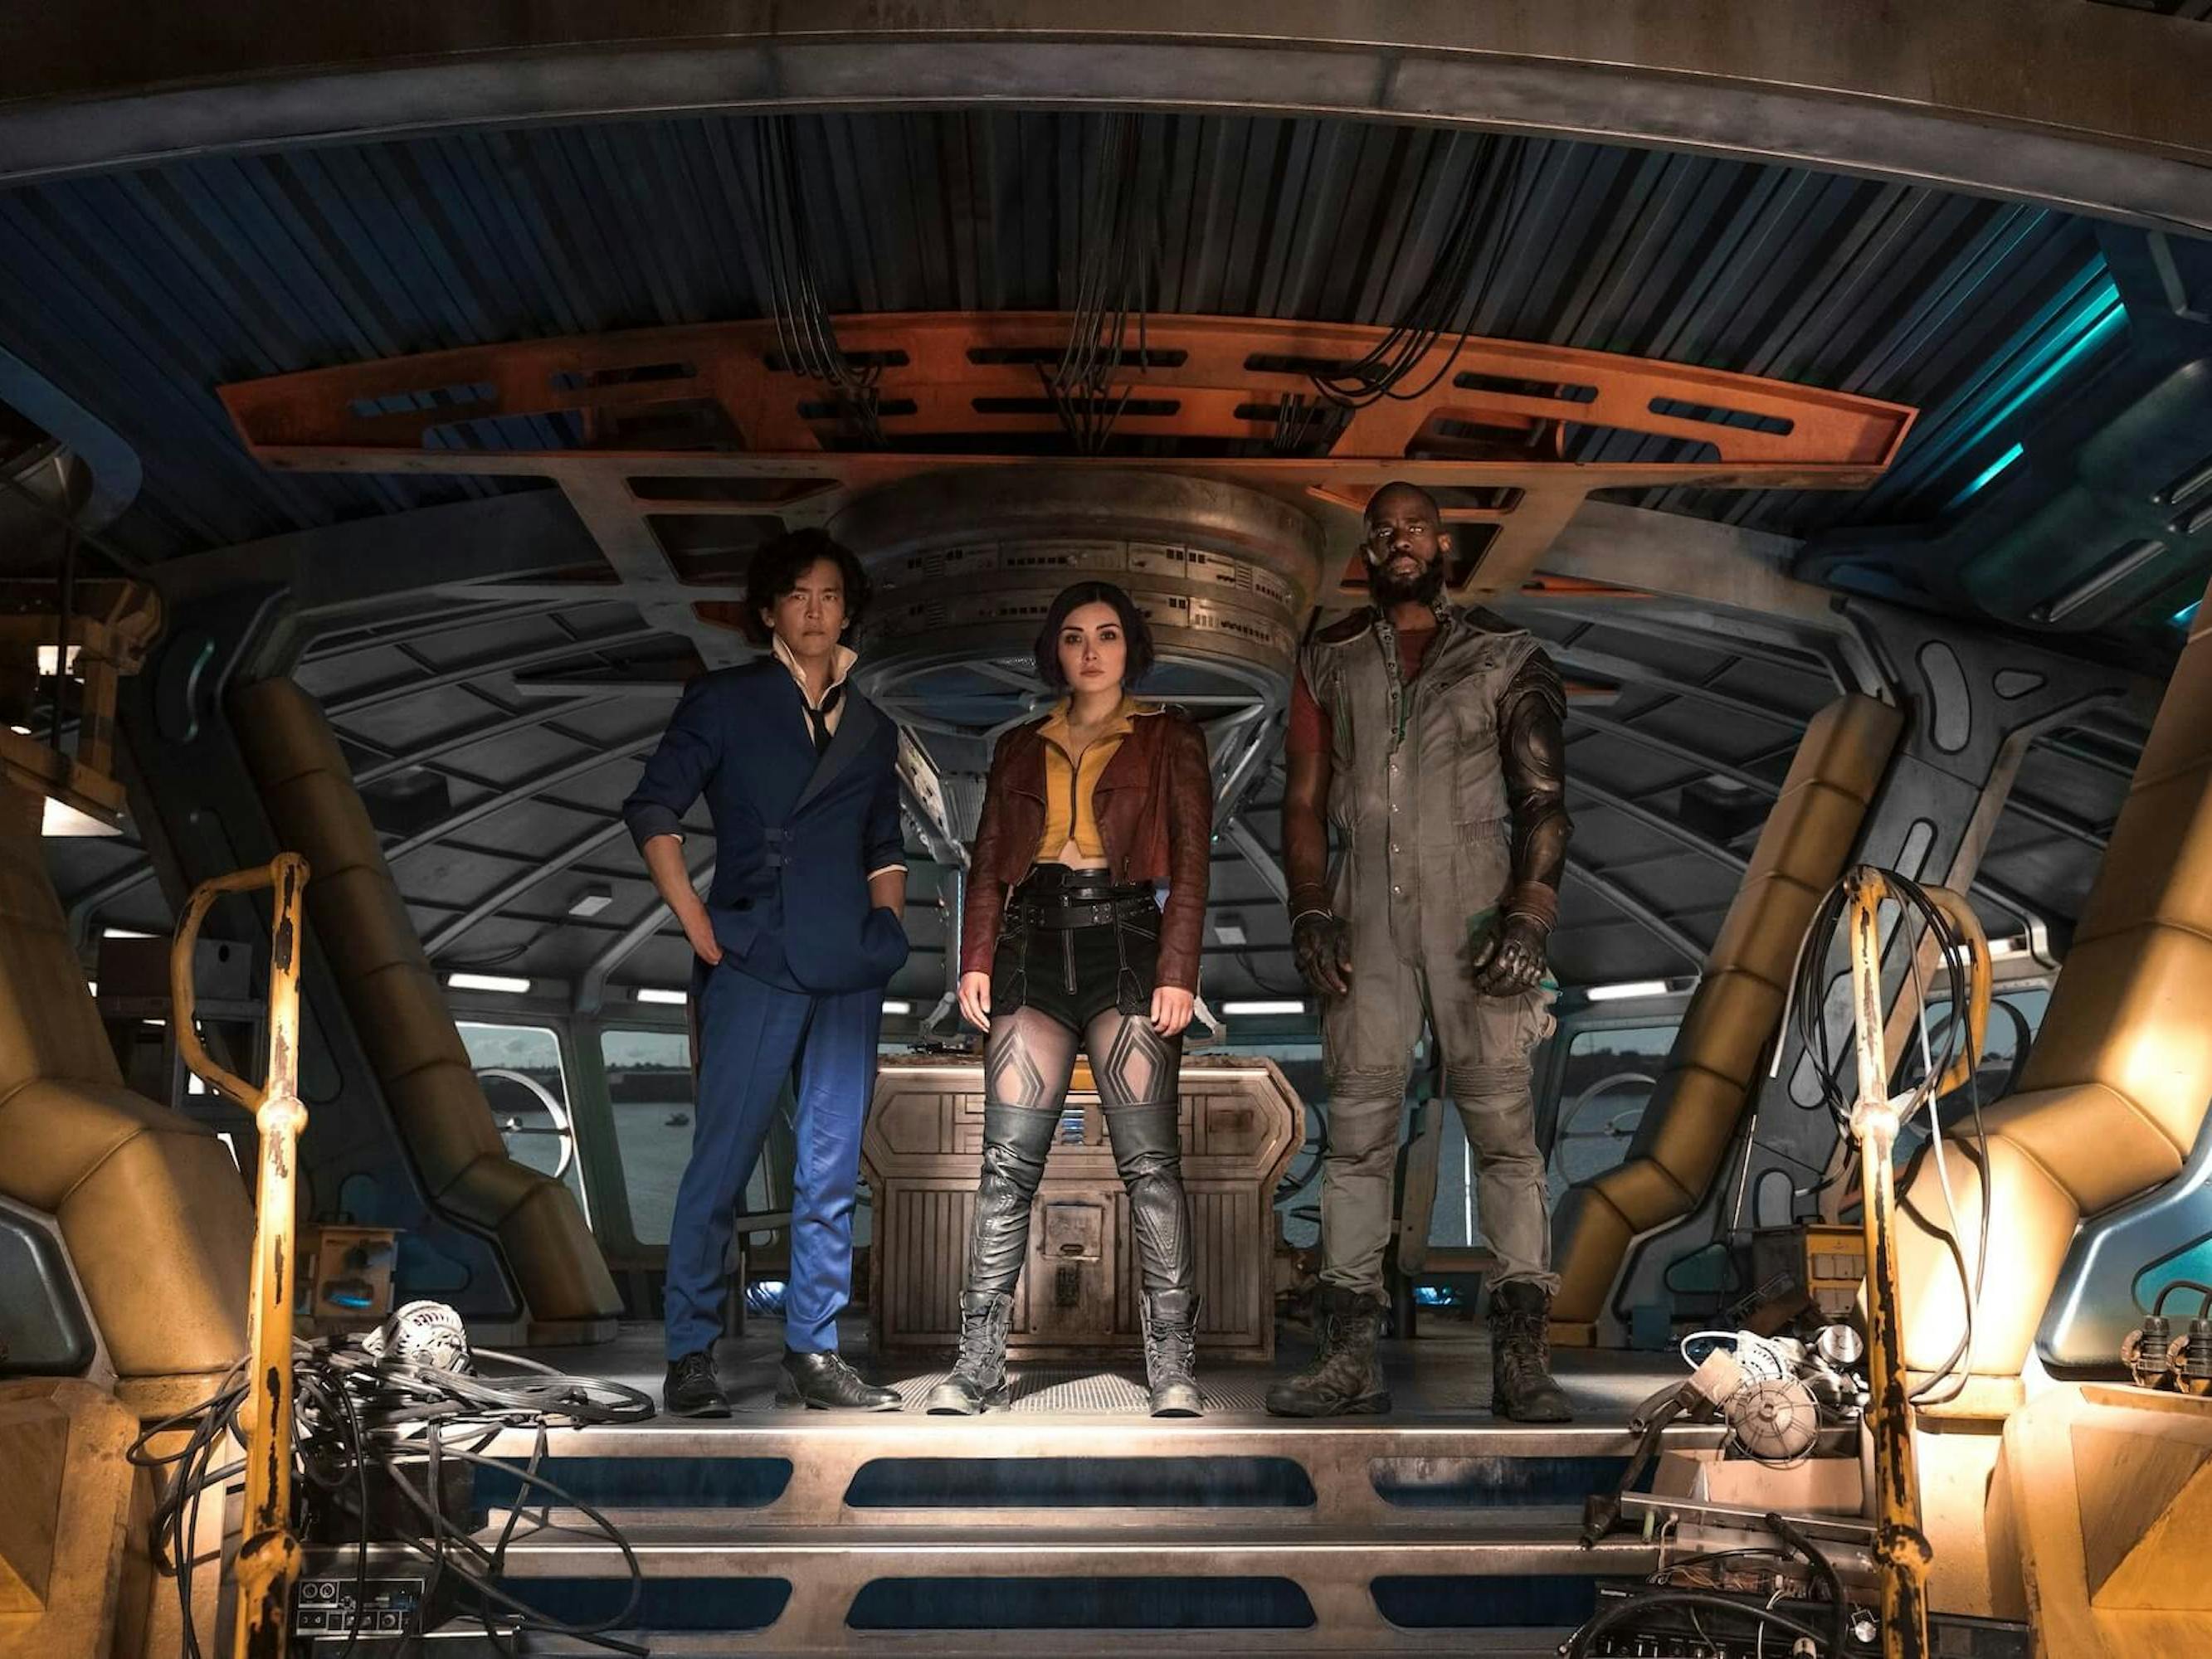 John Cho, Daniella Pineda, and Mustafa Shakir stand together. Cho wears a navy suit, Pineda wears a red jacket and leather boots, and Shakir wears a grey jumpsuit.